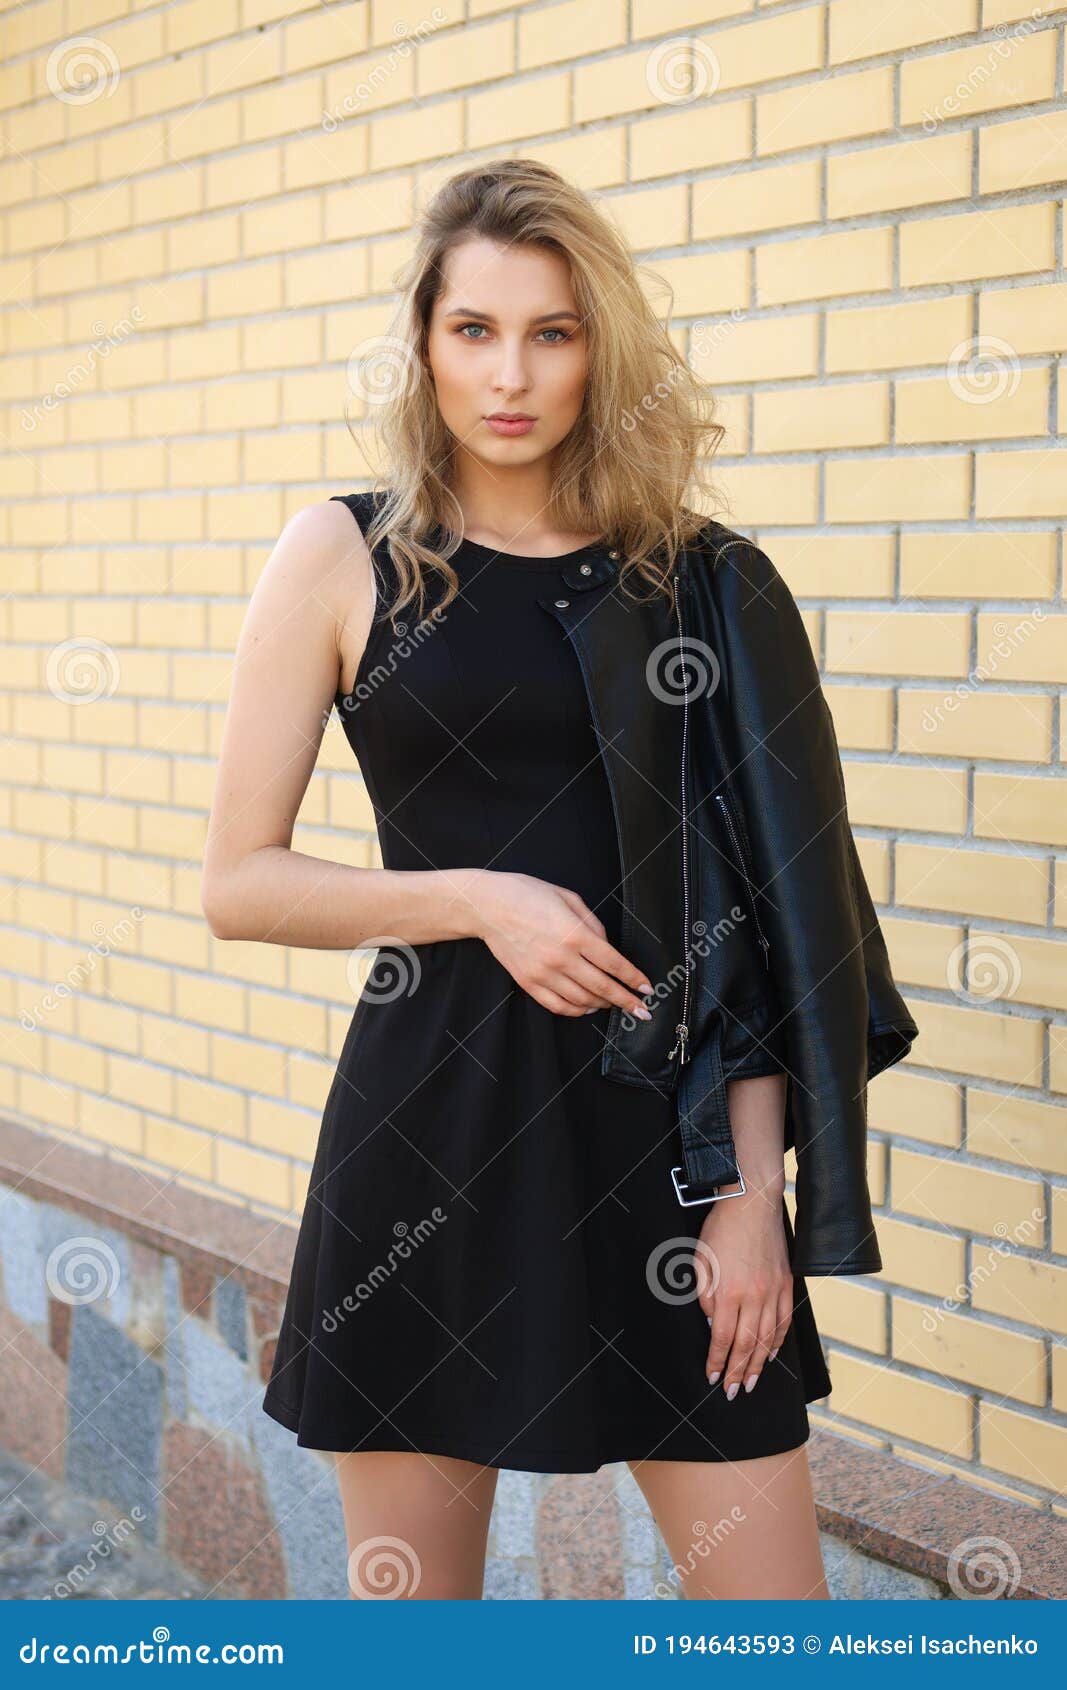 Beautiful Girl in Short Black Dress and Leather Jacket on the Street ...